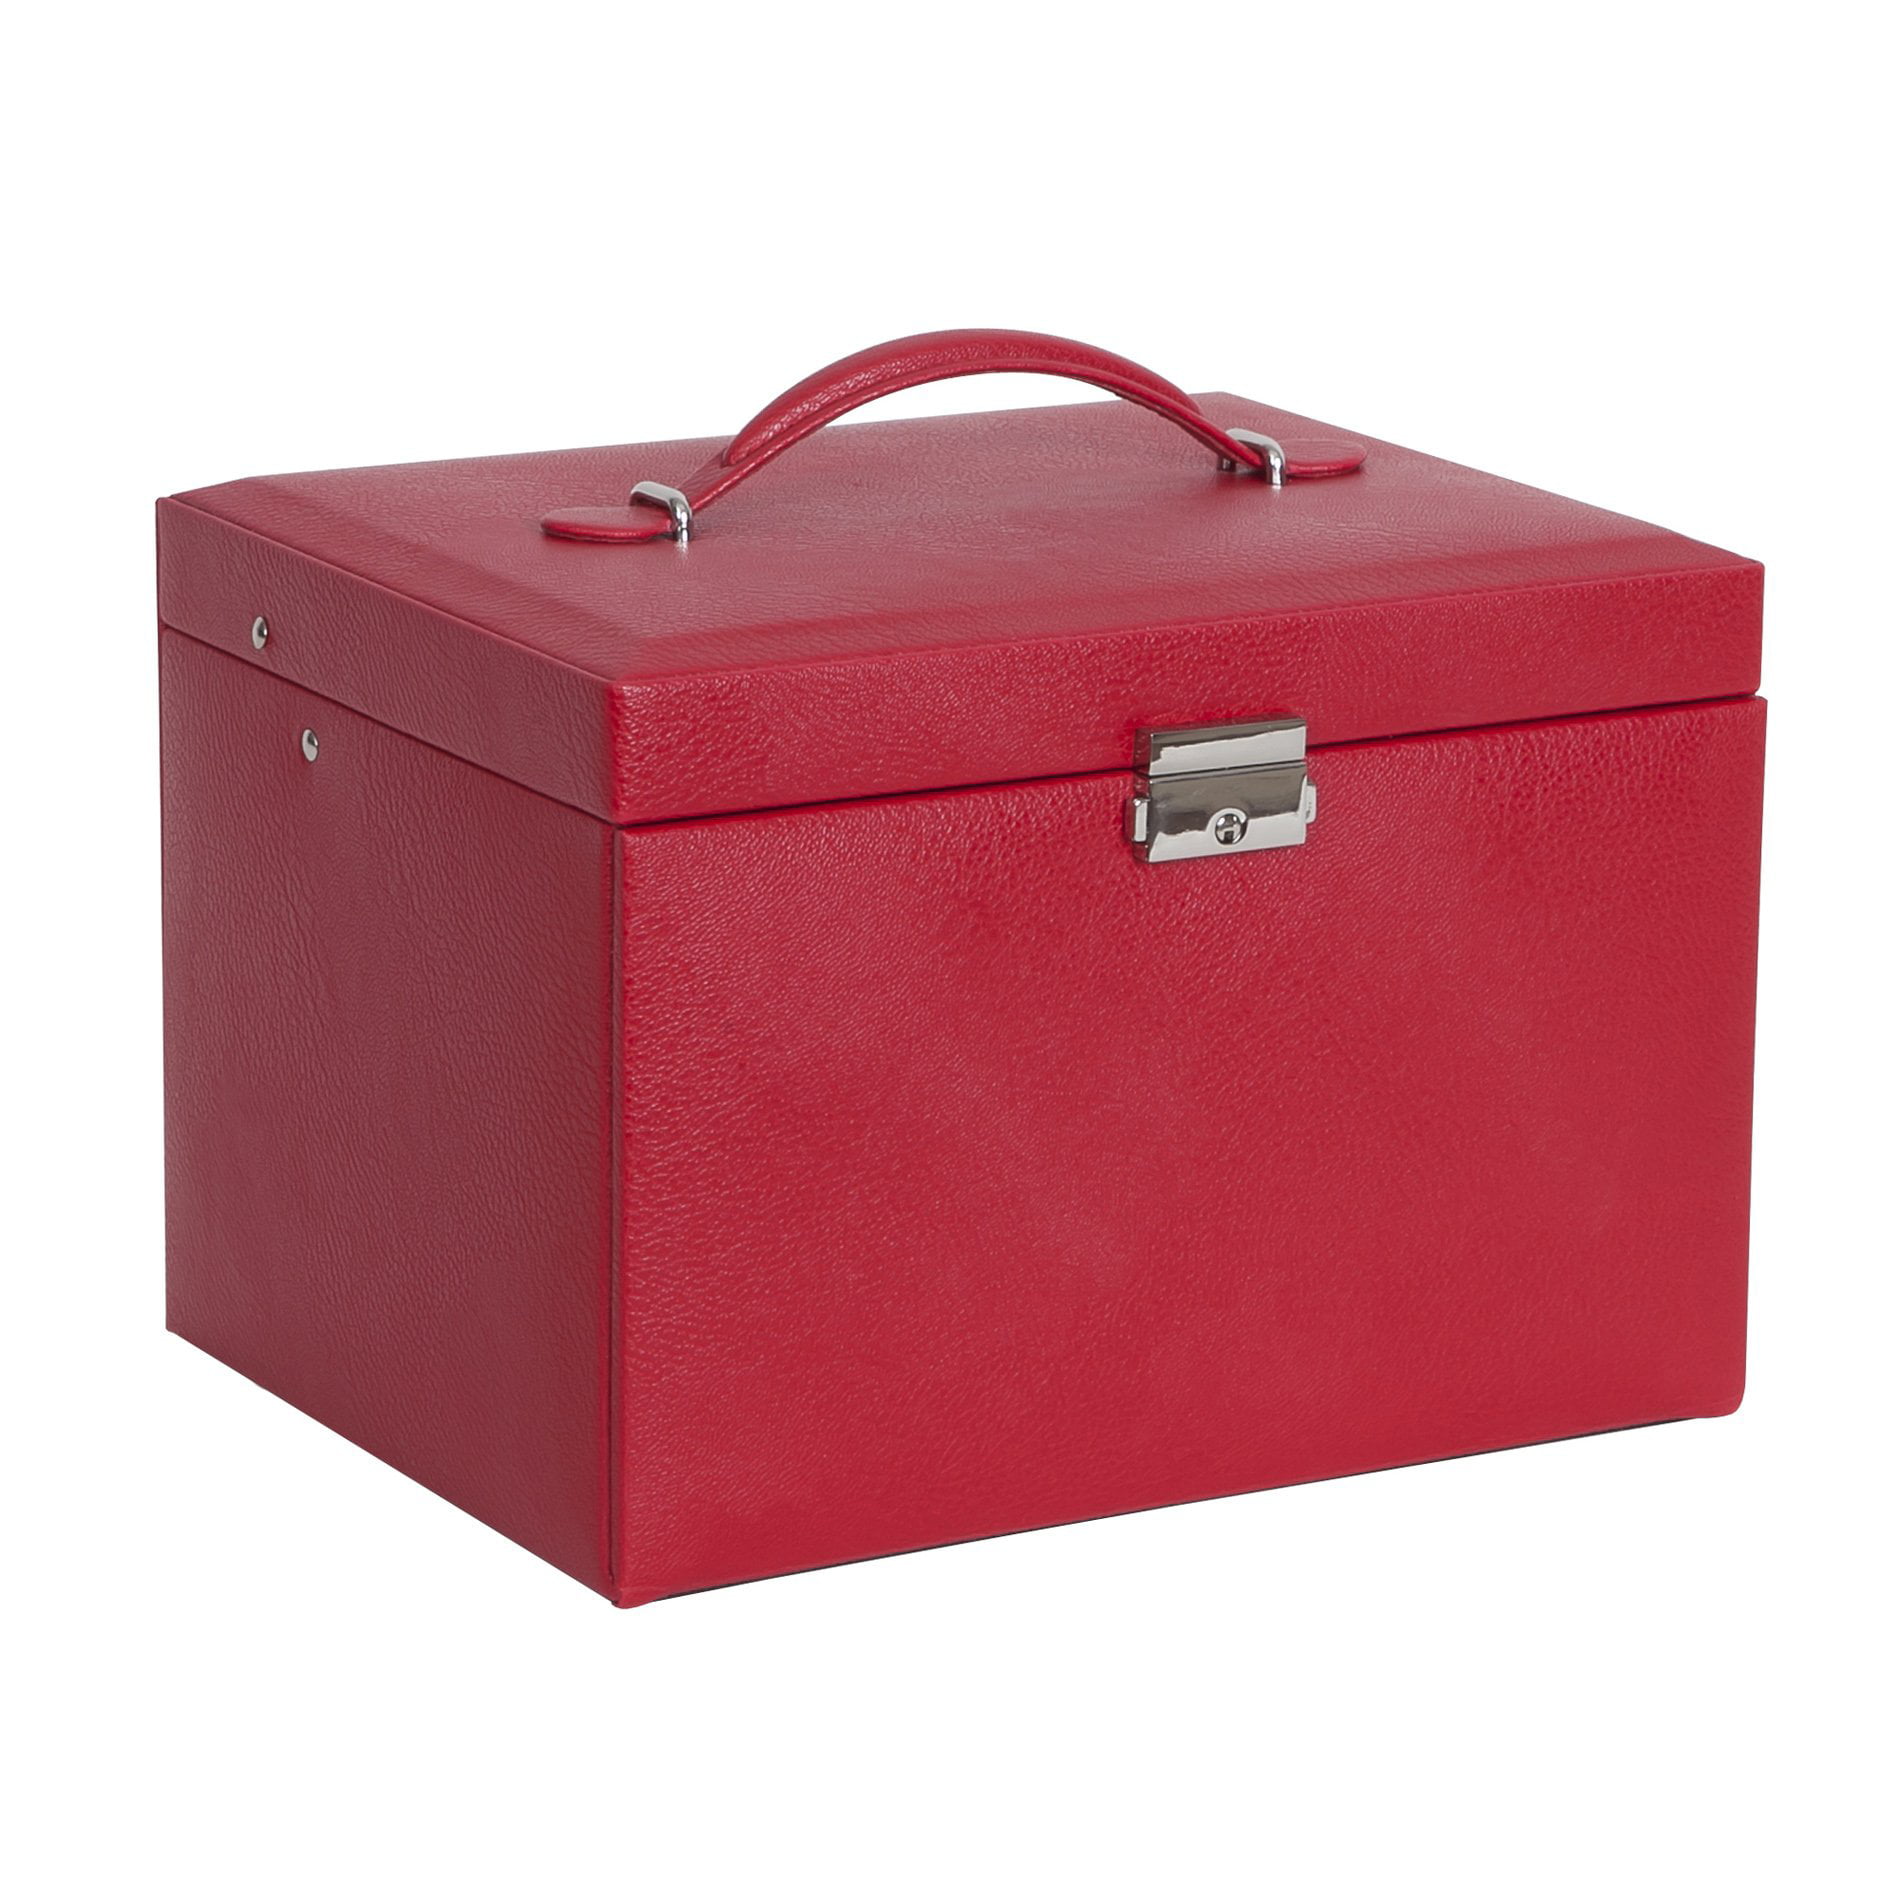 Mele & Co. - Mele&Co. Drop Front Locking Jewelry Box, Red Faux Leather ...